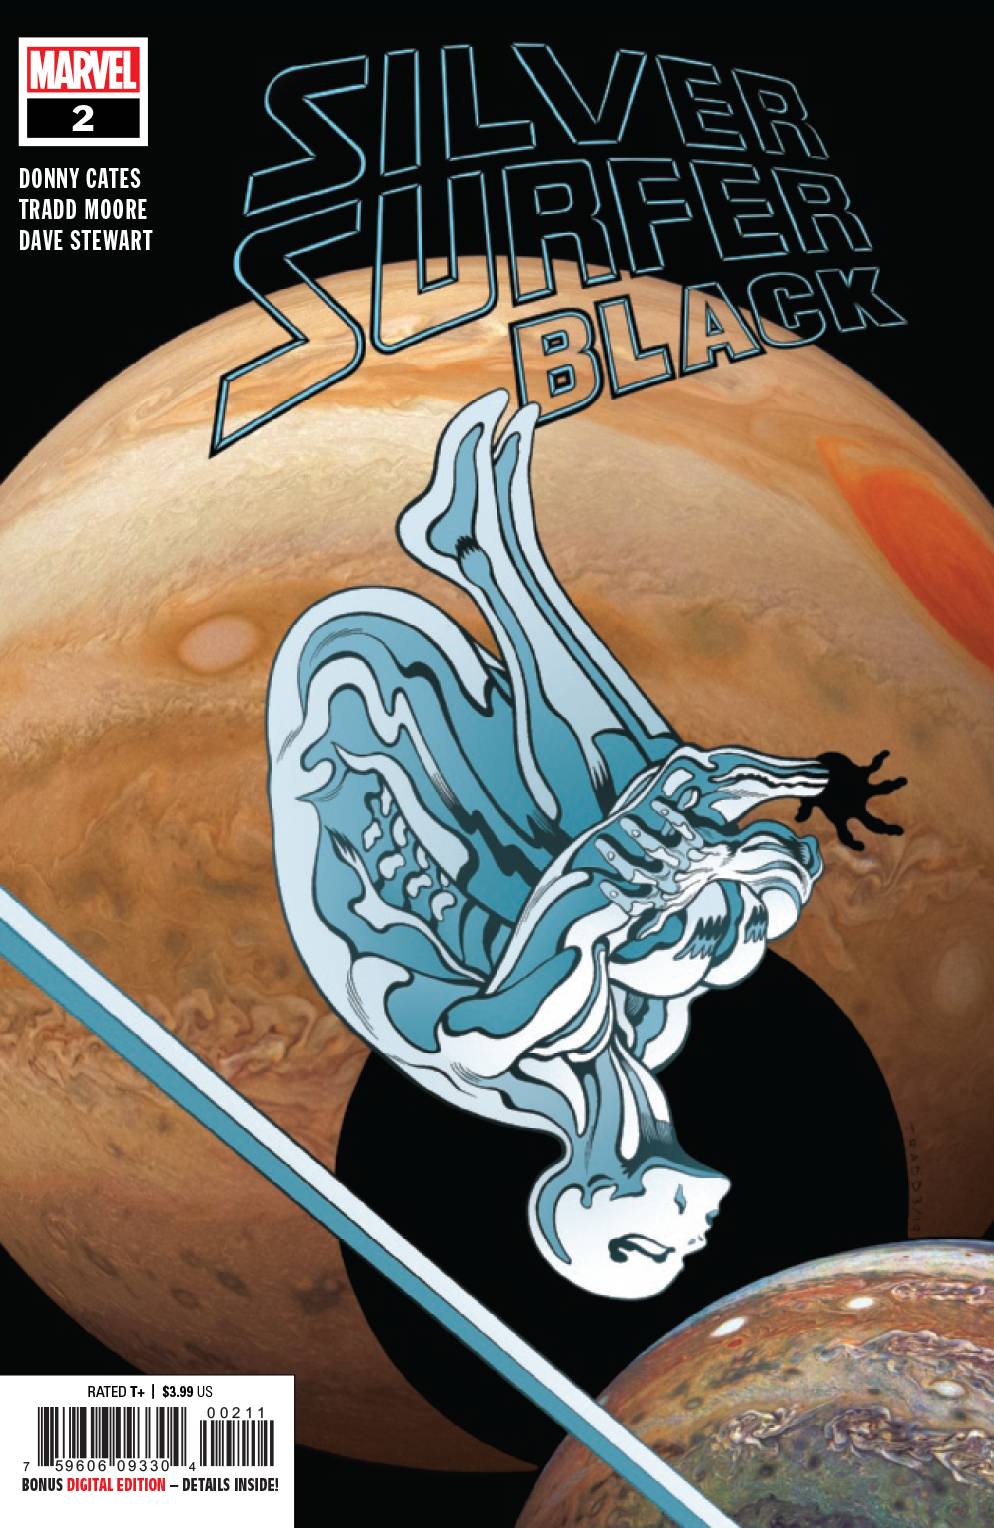 SILVER SURFER BLACK #2 (OF 5) 2019 (SILVER SURFER BECOMES VOID KNIGHT)